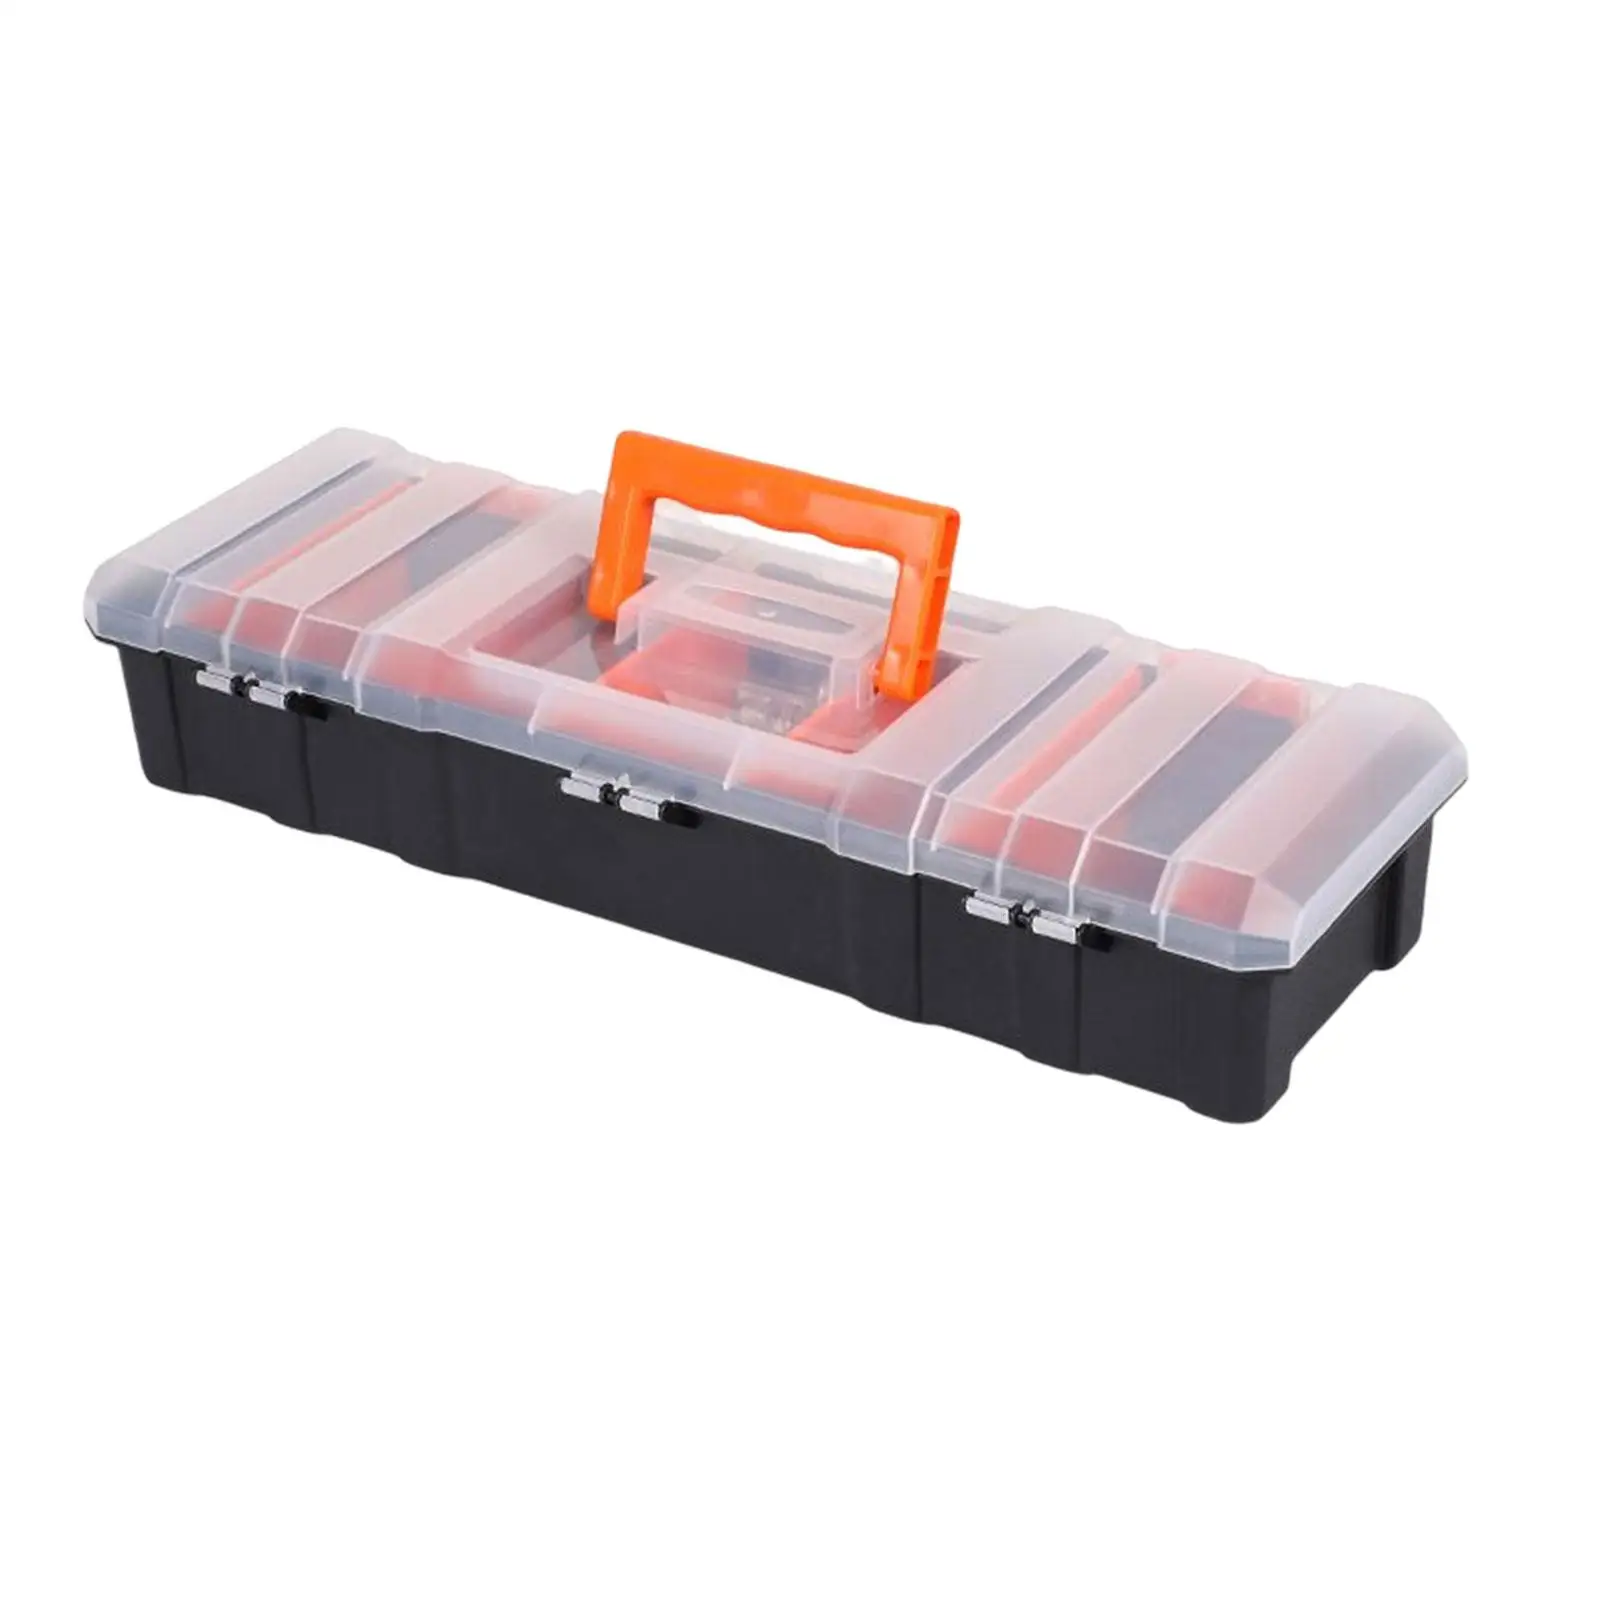 Multifunction Organizer Tool Box Protective Toolbox Protection Impact Resistant Portable Storage Case for Outdoor Accessories